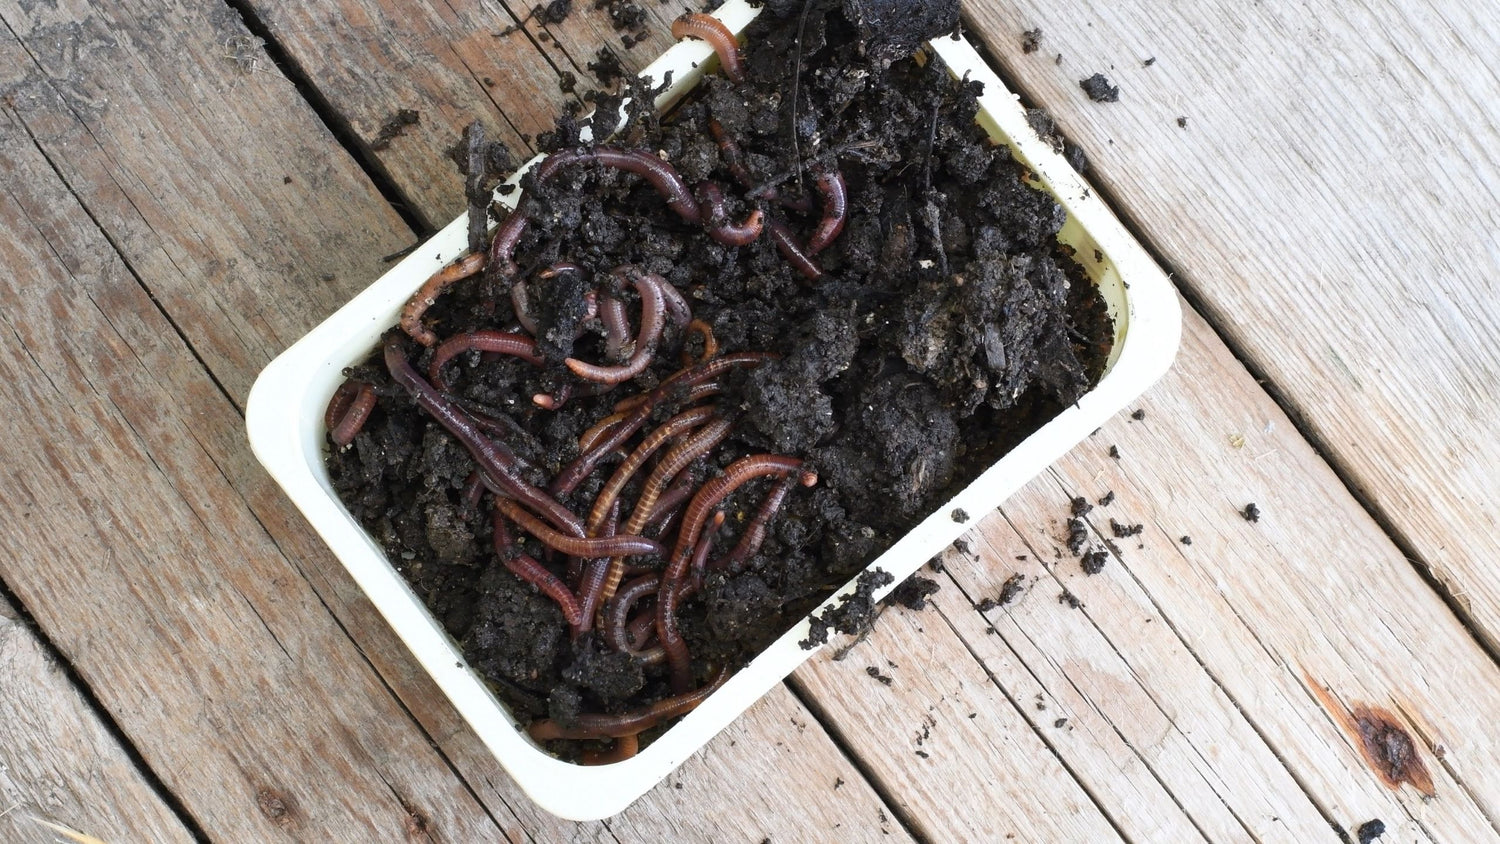 How to Break Down Compost Meme's Worms